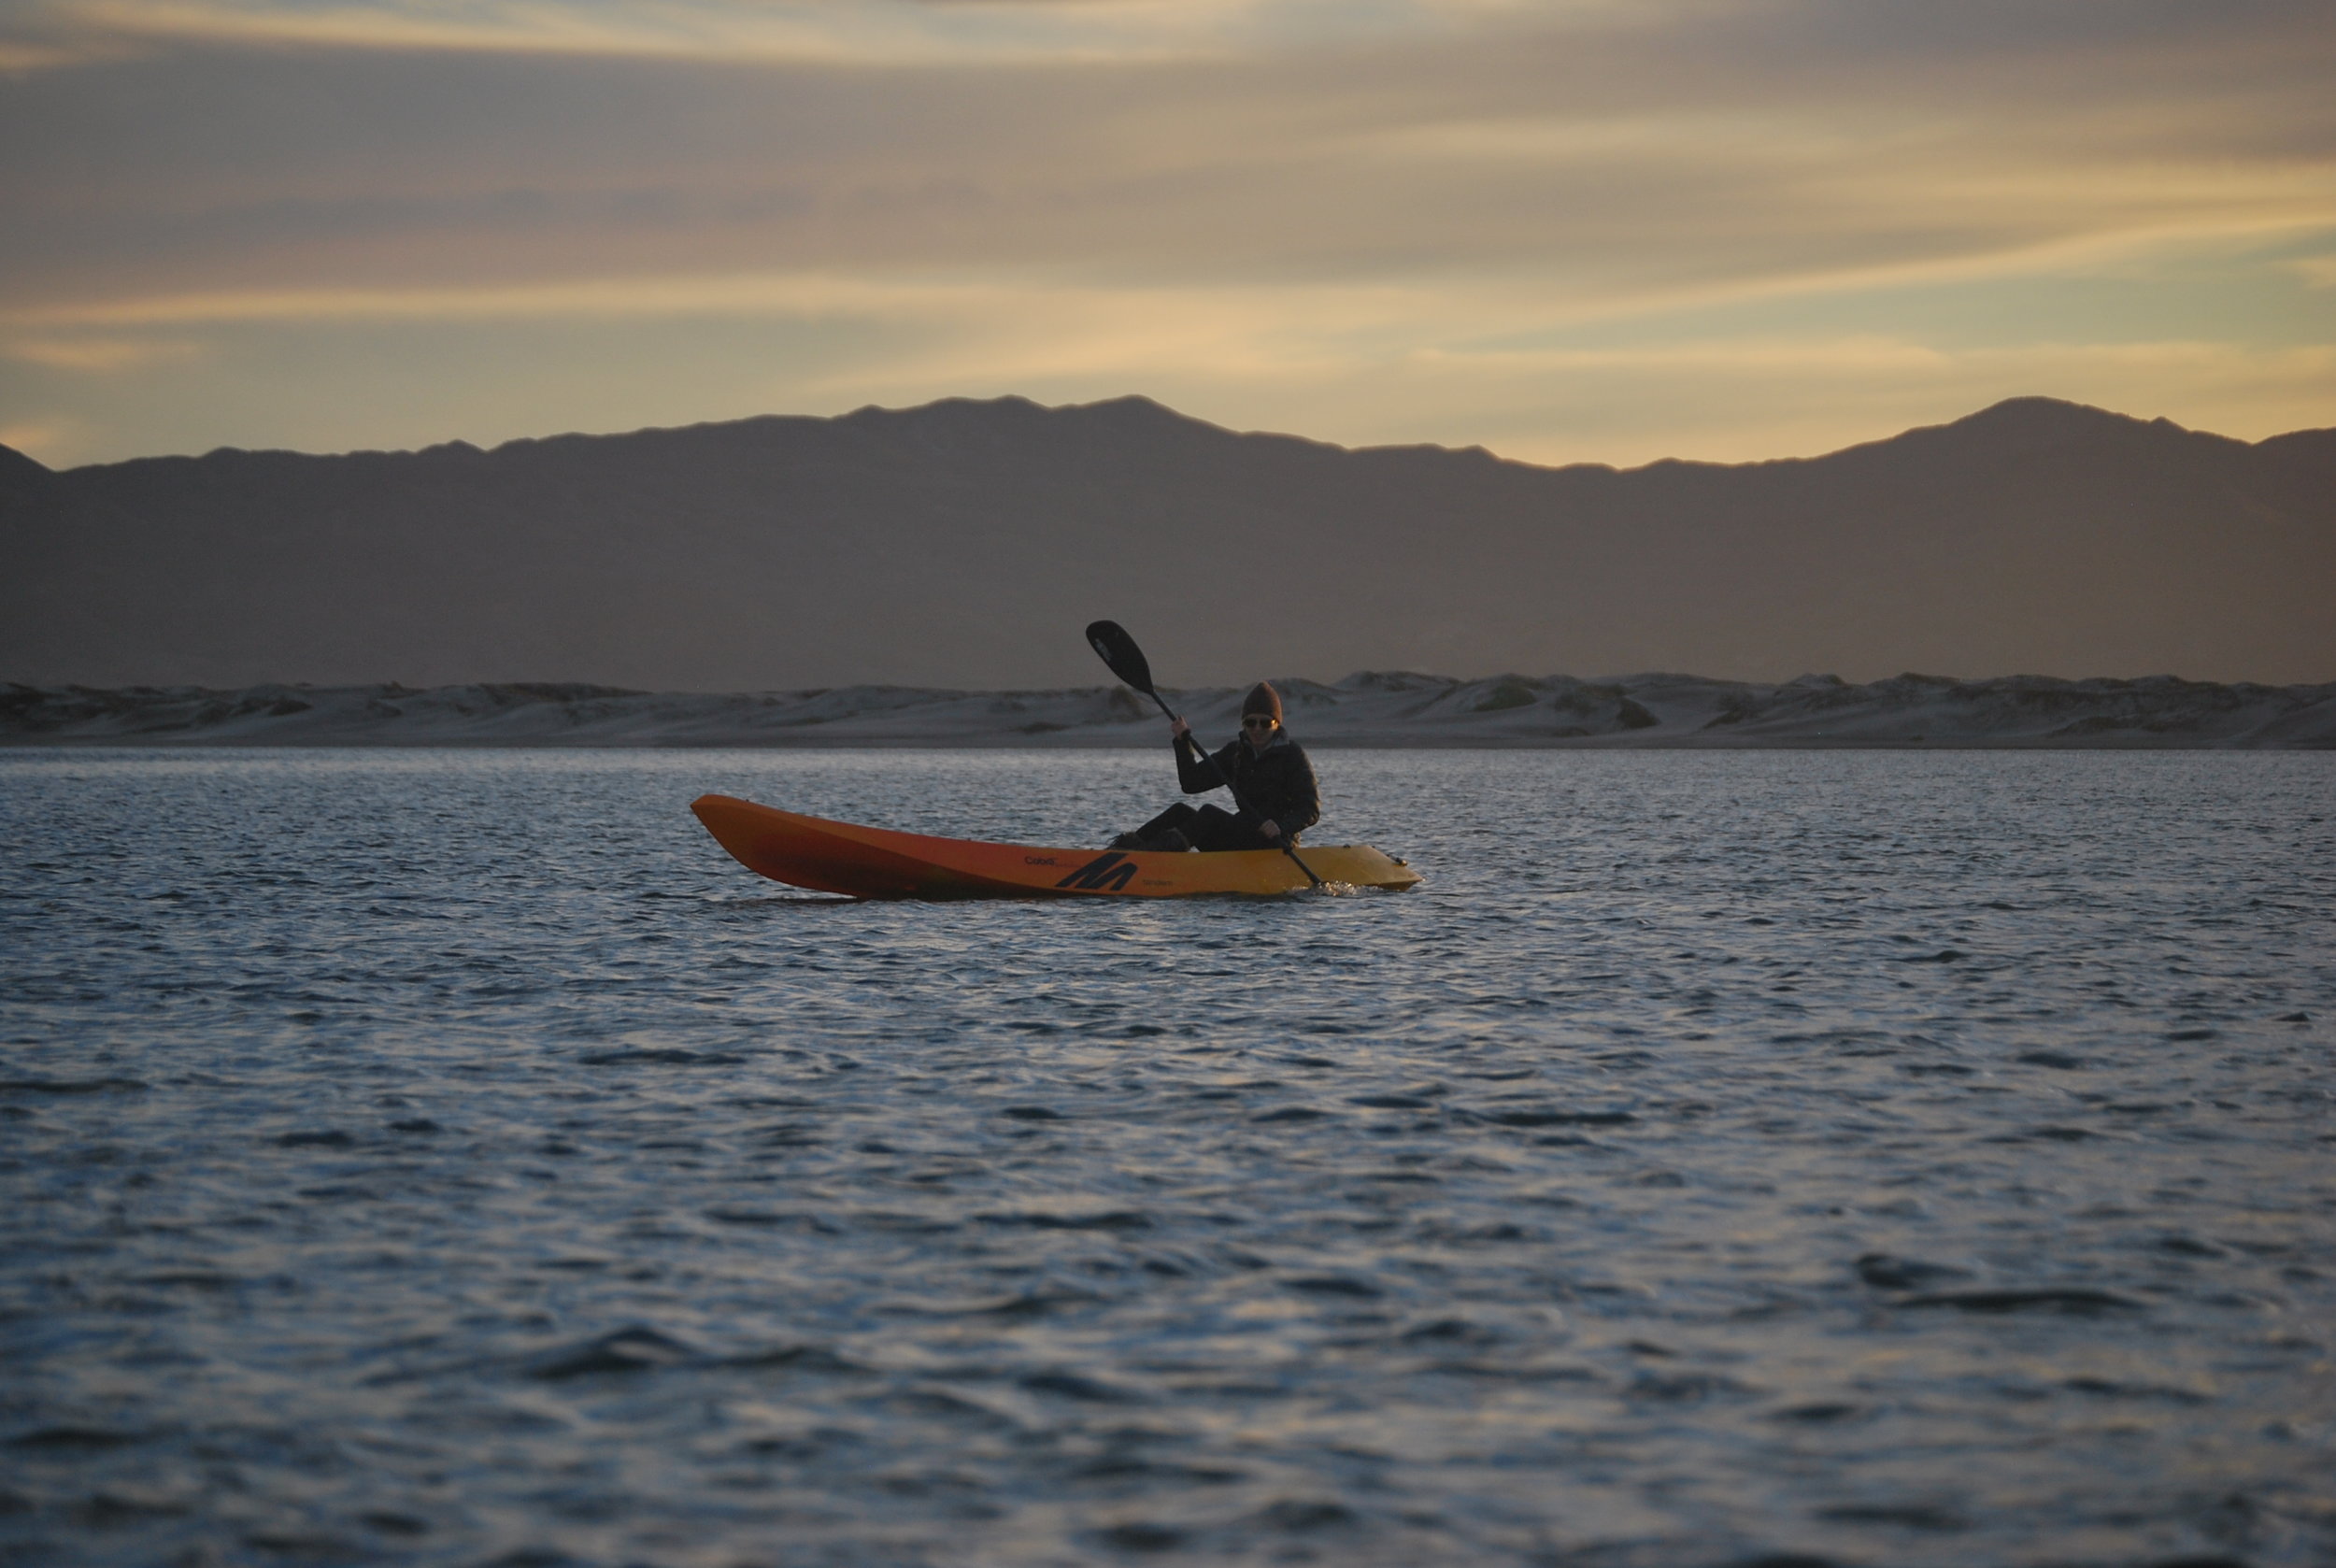 During free time, take out a kayak to explore the Bay